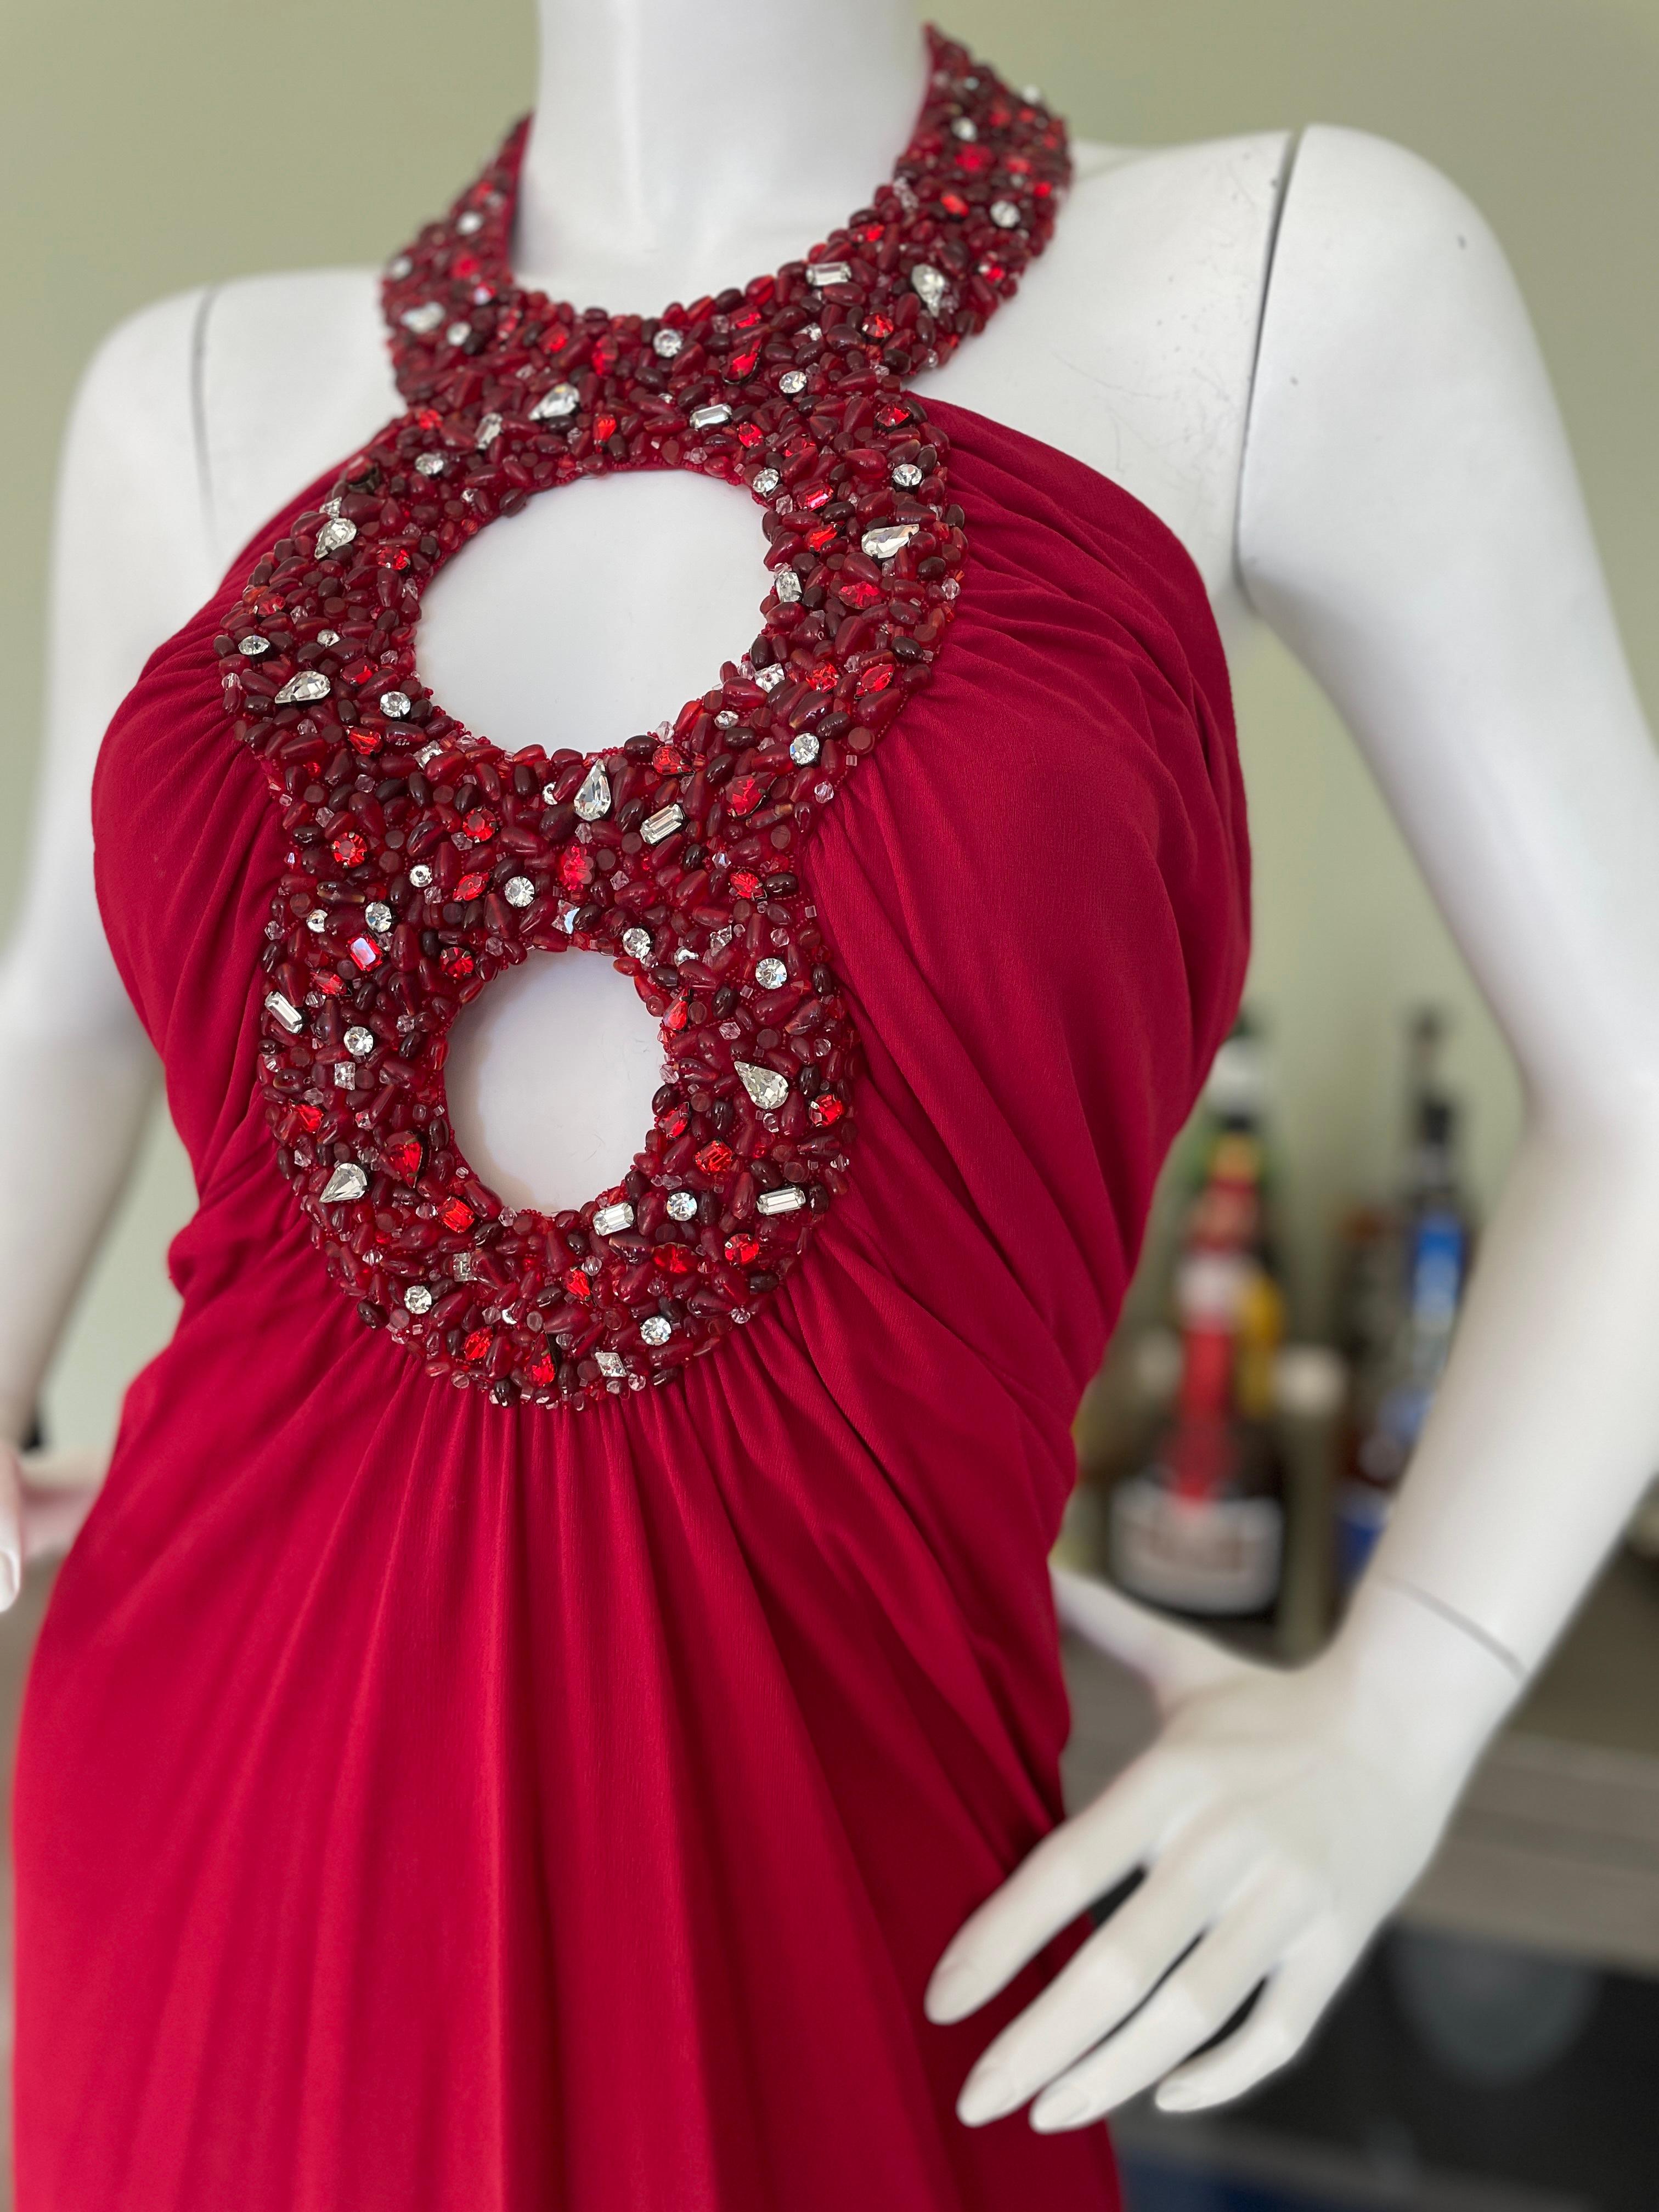 Women's Azzaro Vintage Red Cocktail Dress with Jeweled Keyhole For Sale